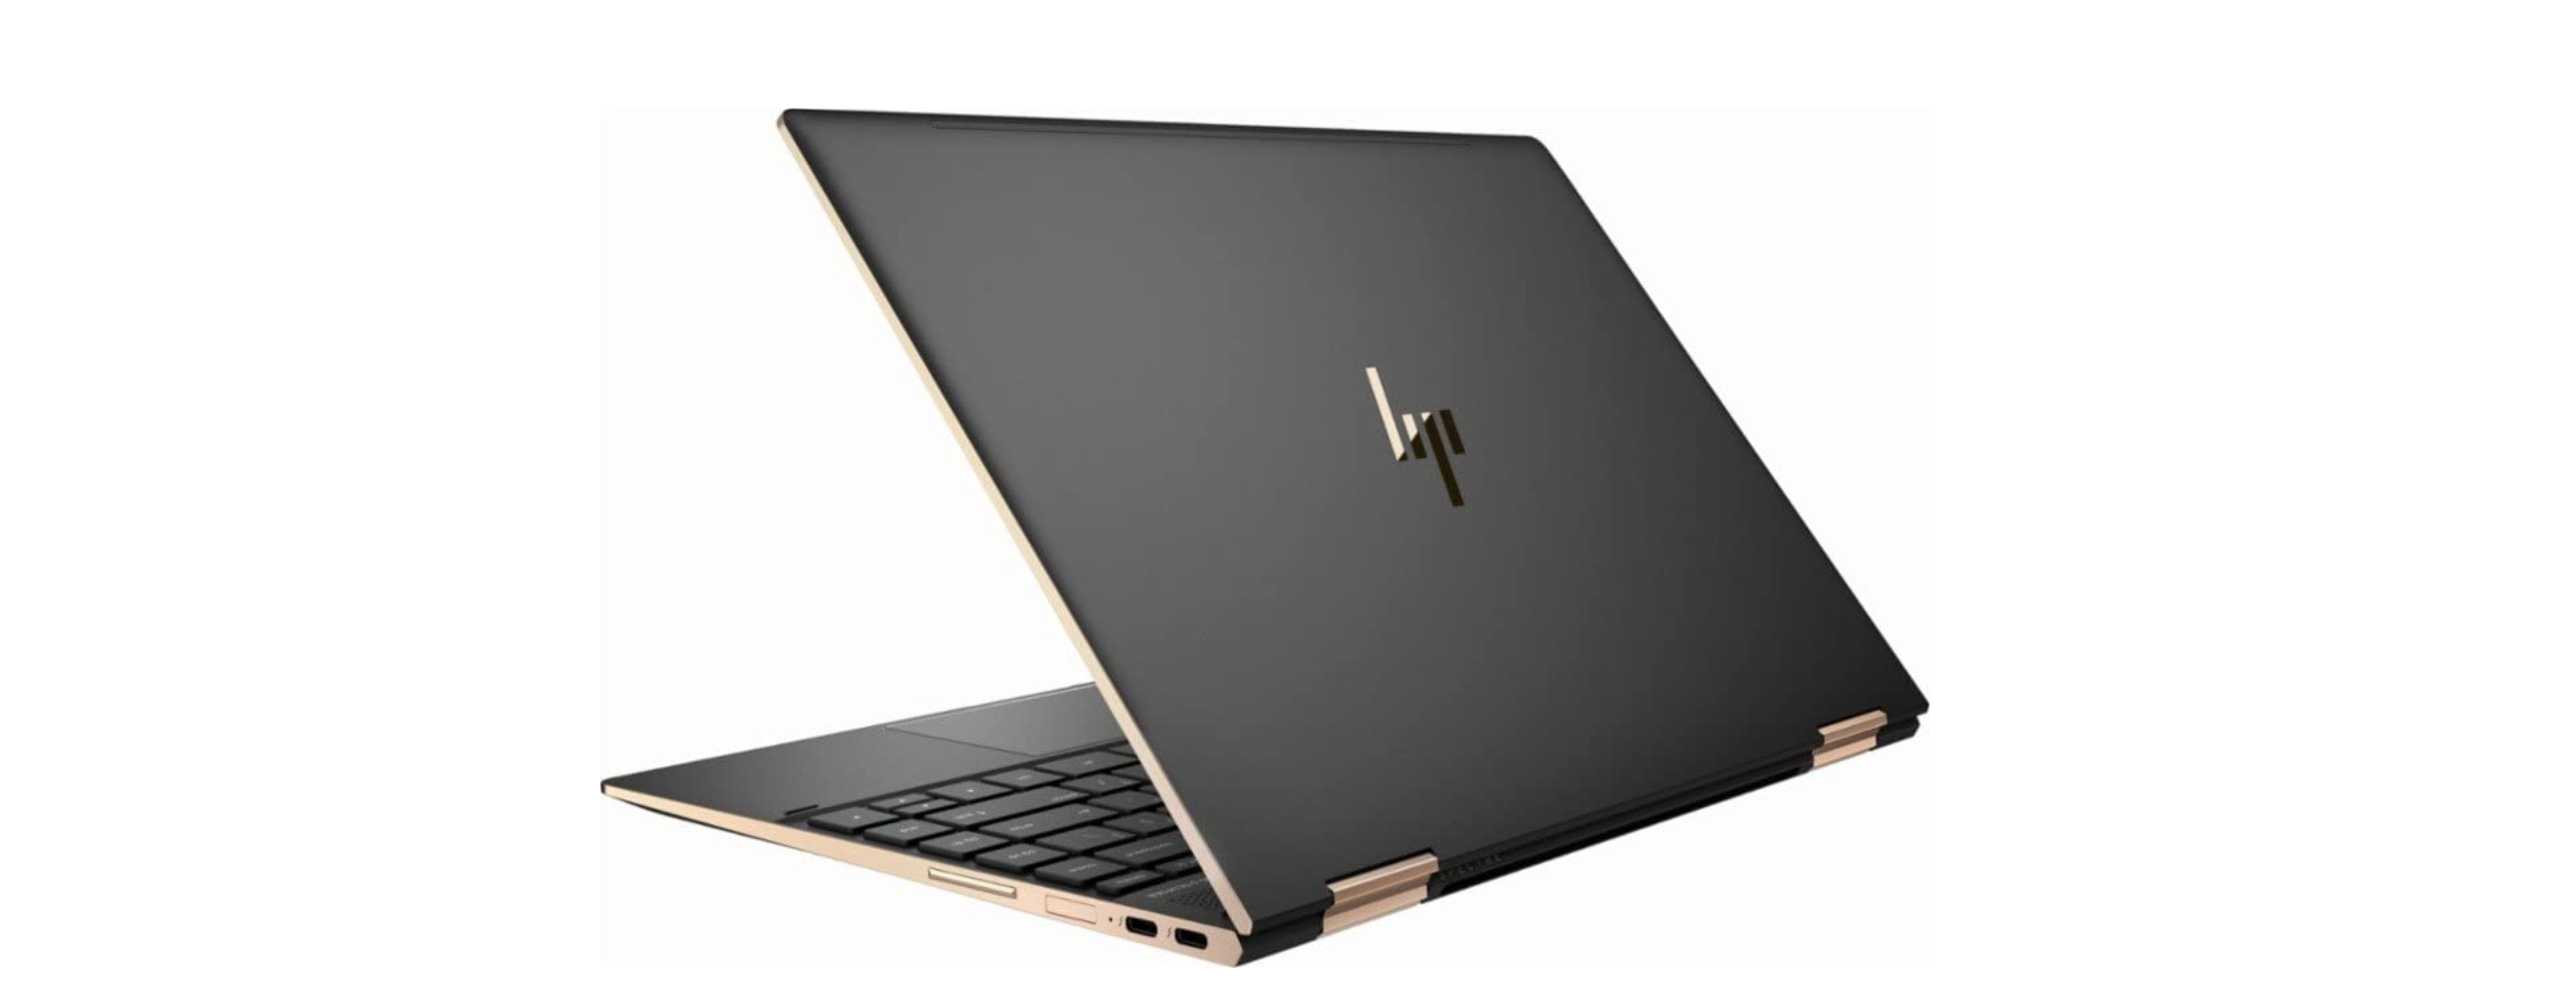 Top 6 laptops for programming in 2021